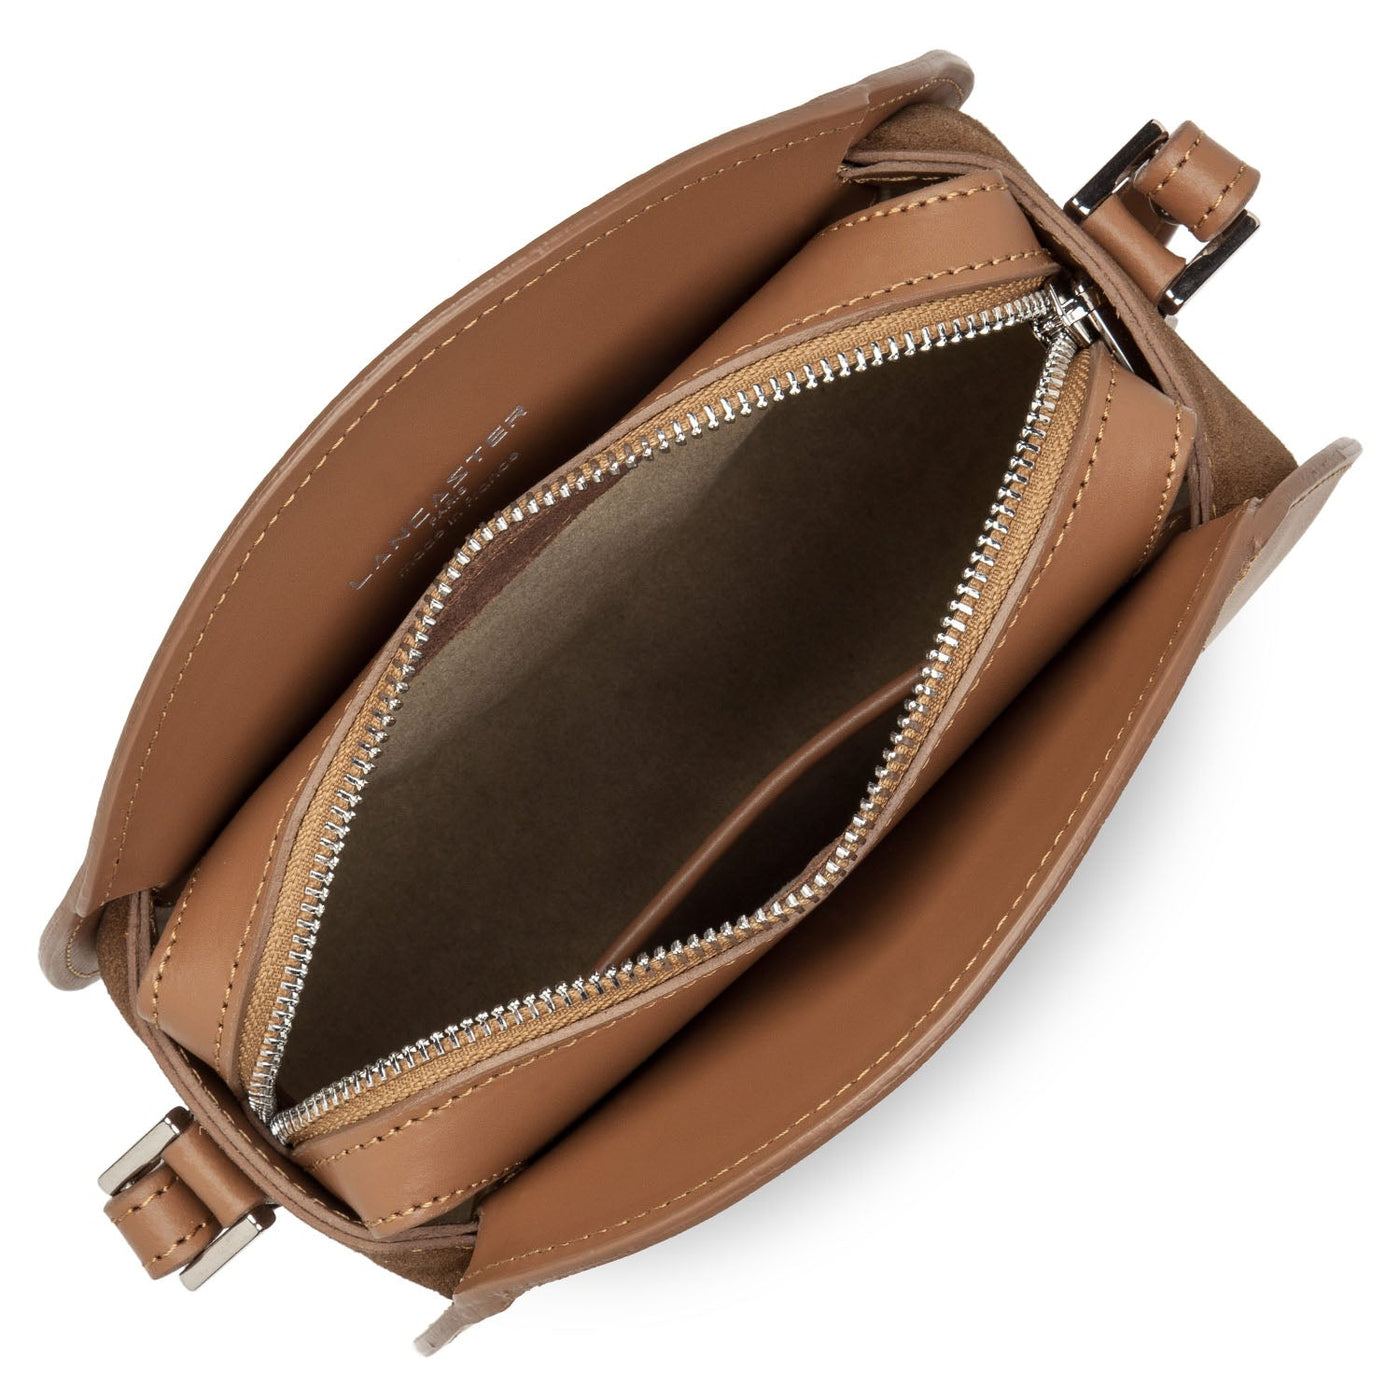 round bag - smooth lune #couleur_camel